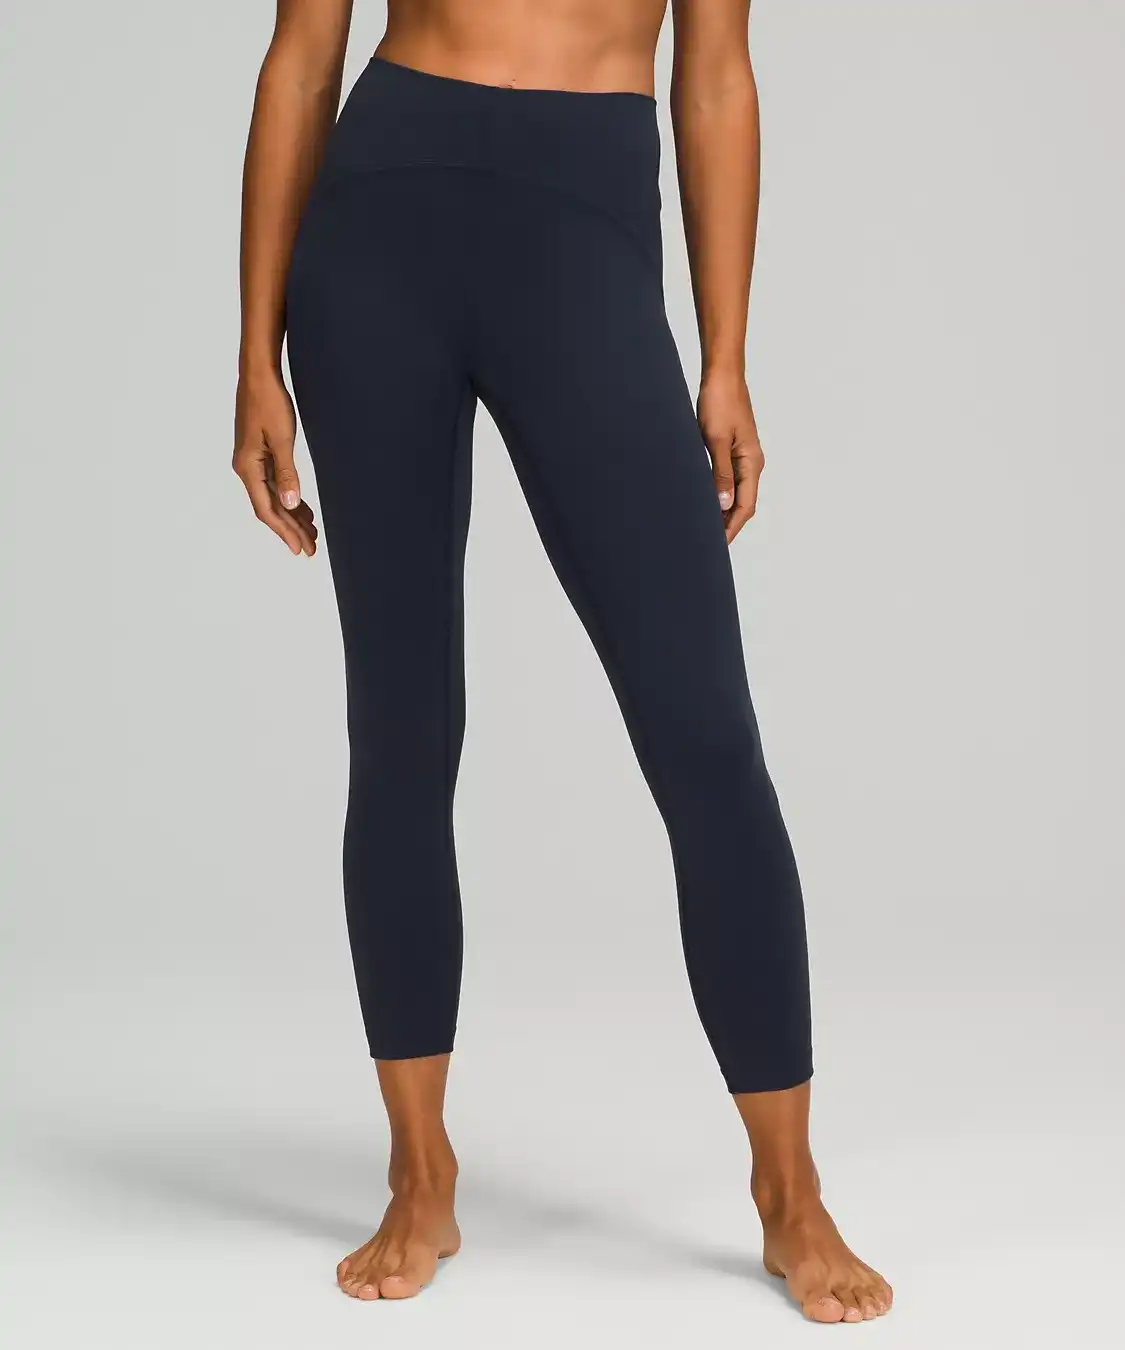 Lululemon Yoga Pants reviews in Athletic Wear - ChickAdvisor (page 6)